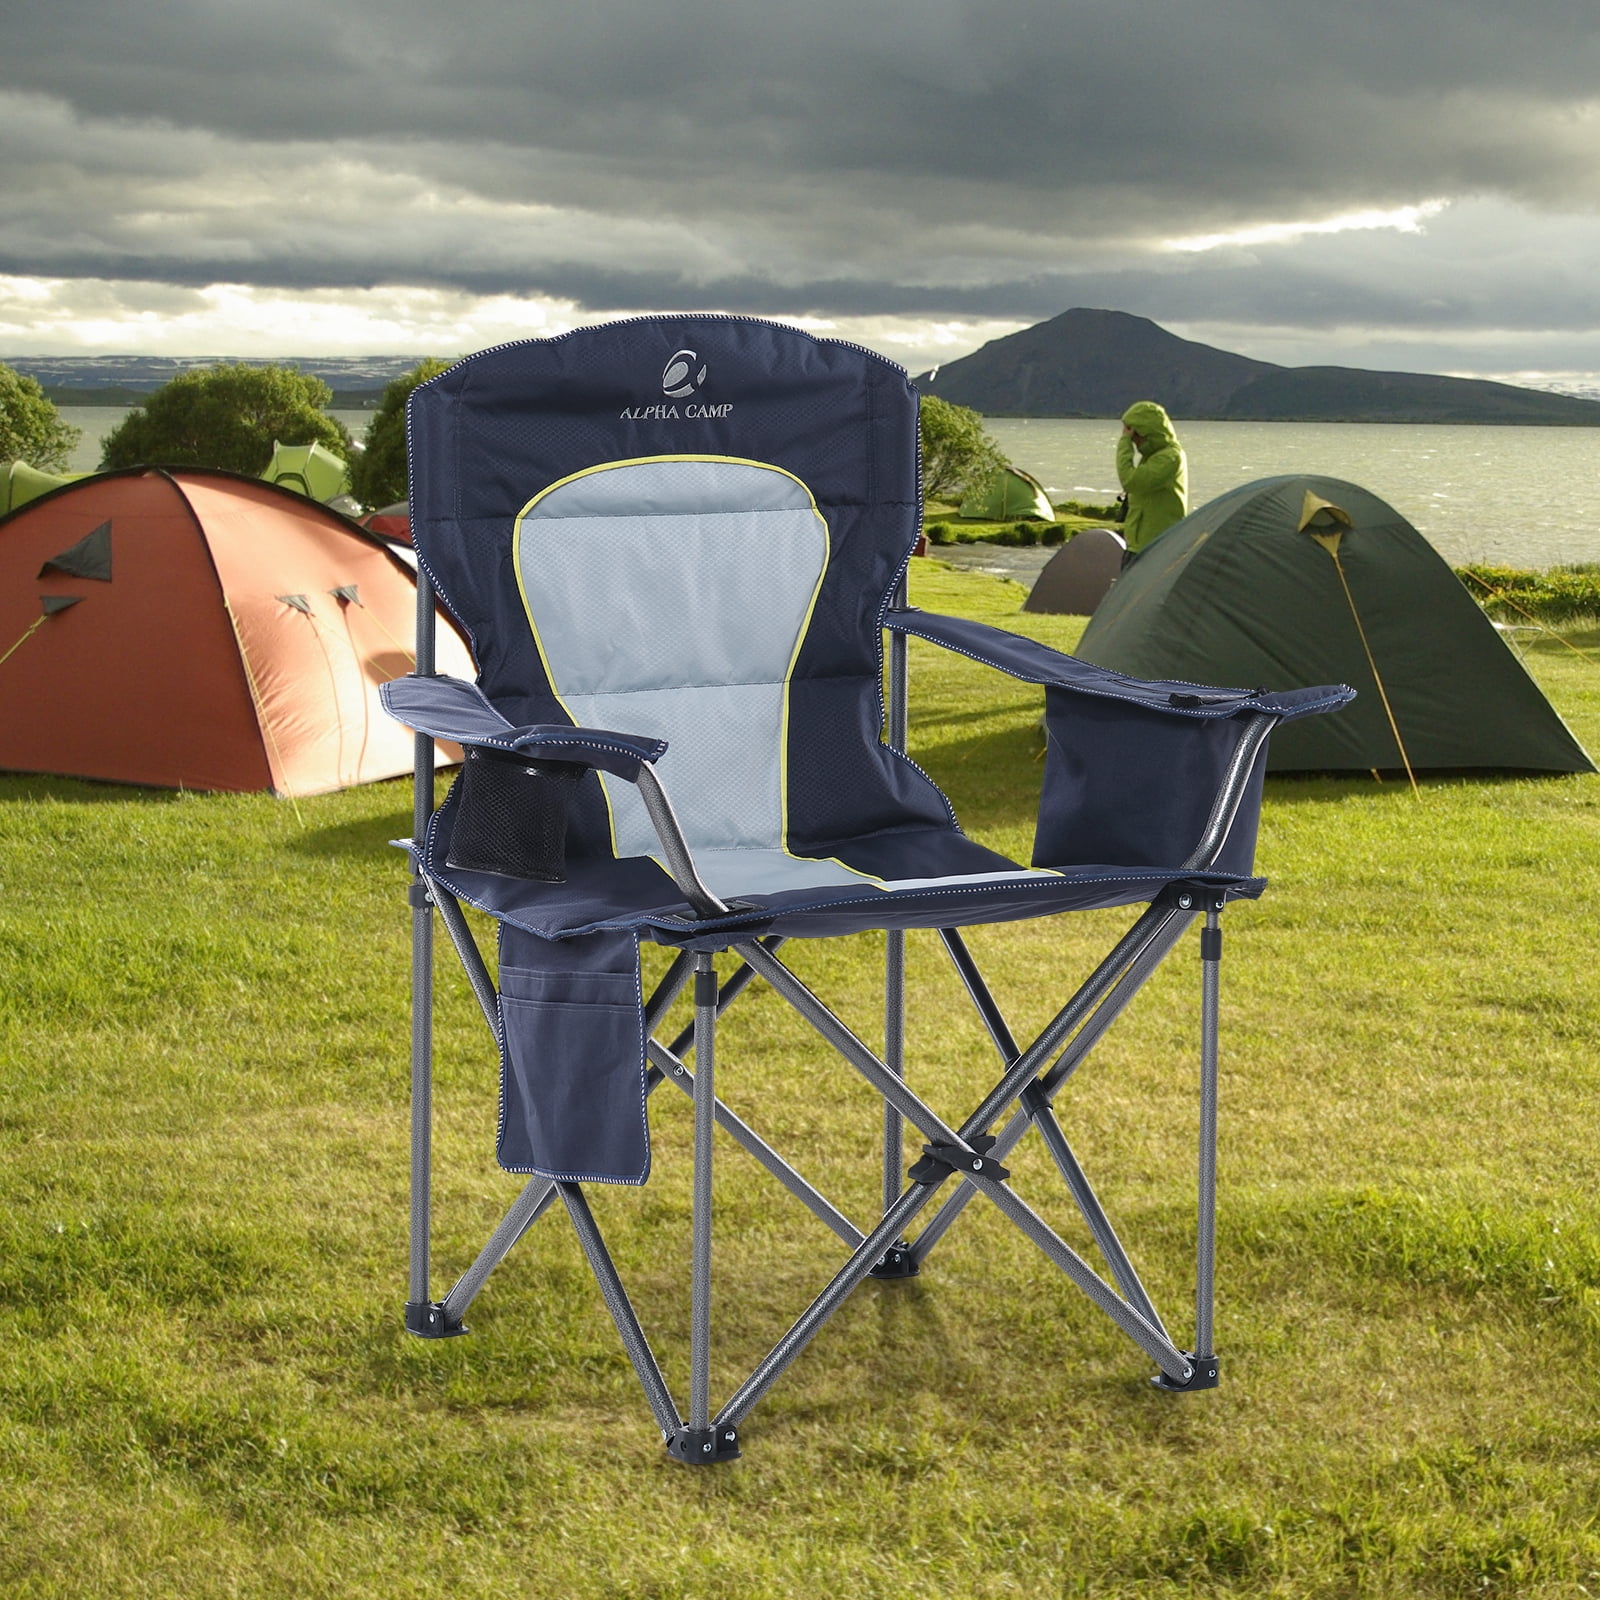 Alpha Camp Oversized Camping Chair Portable Padded Bangladesh